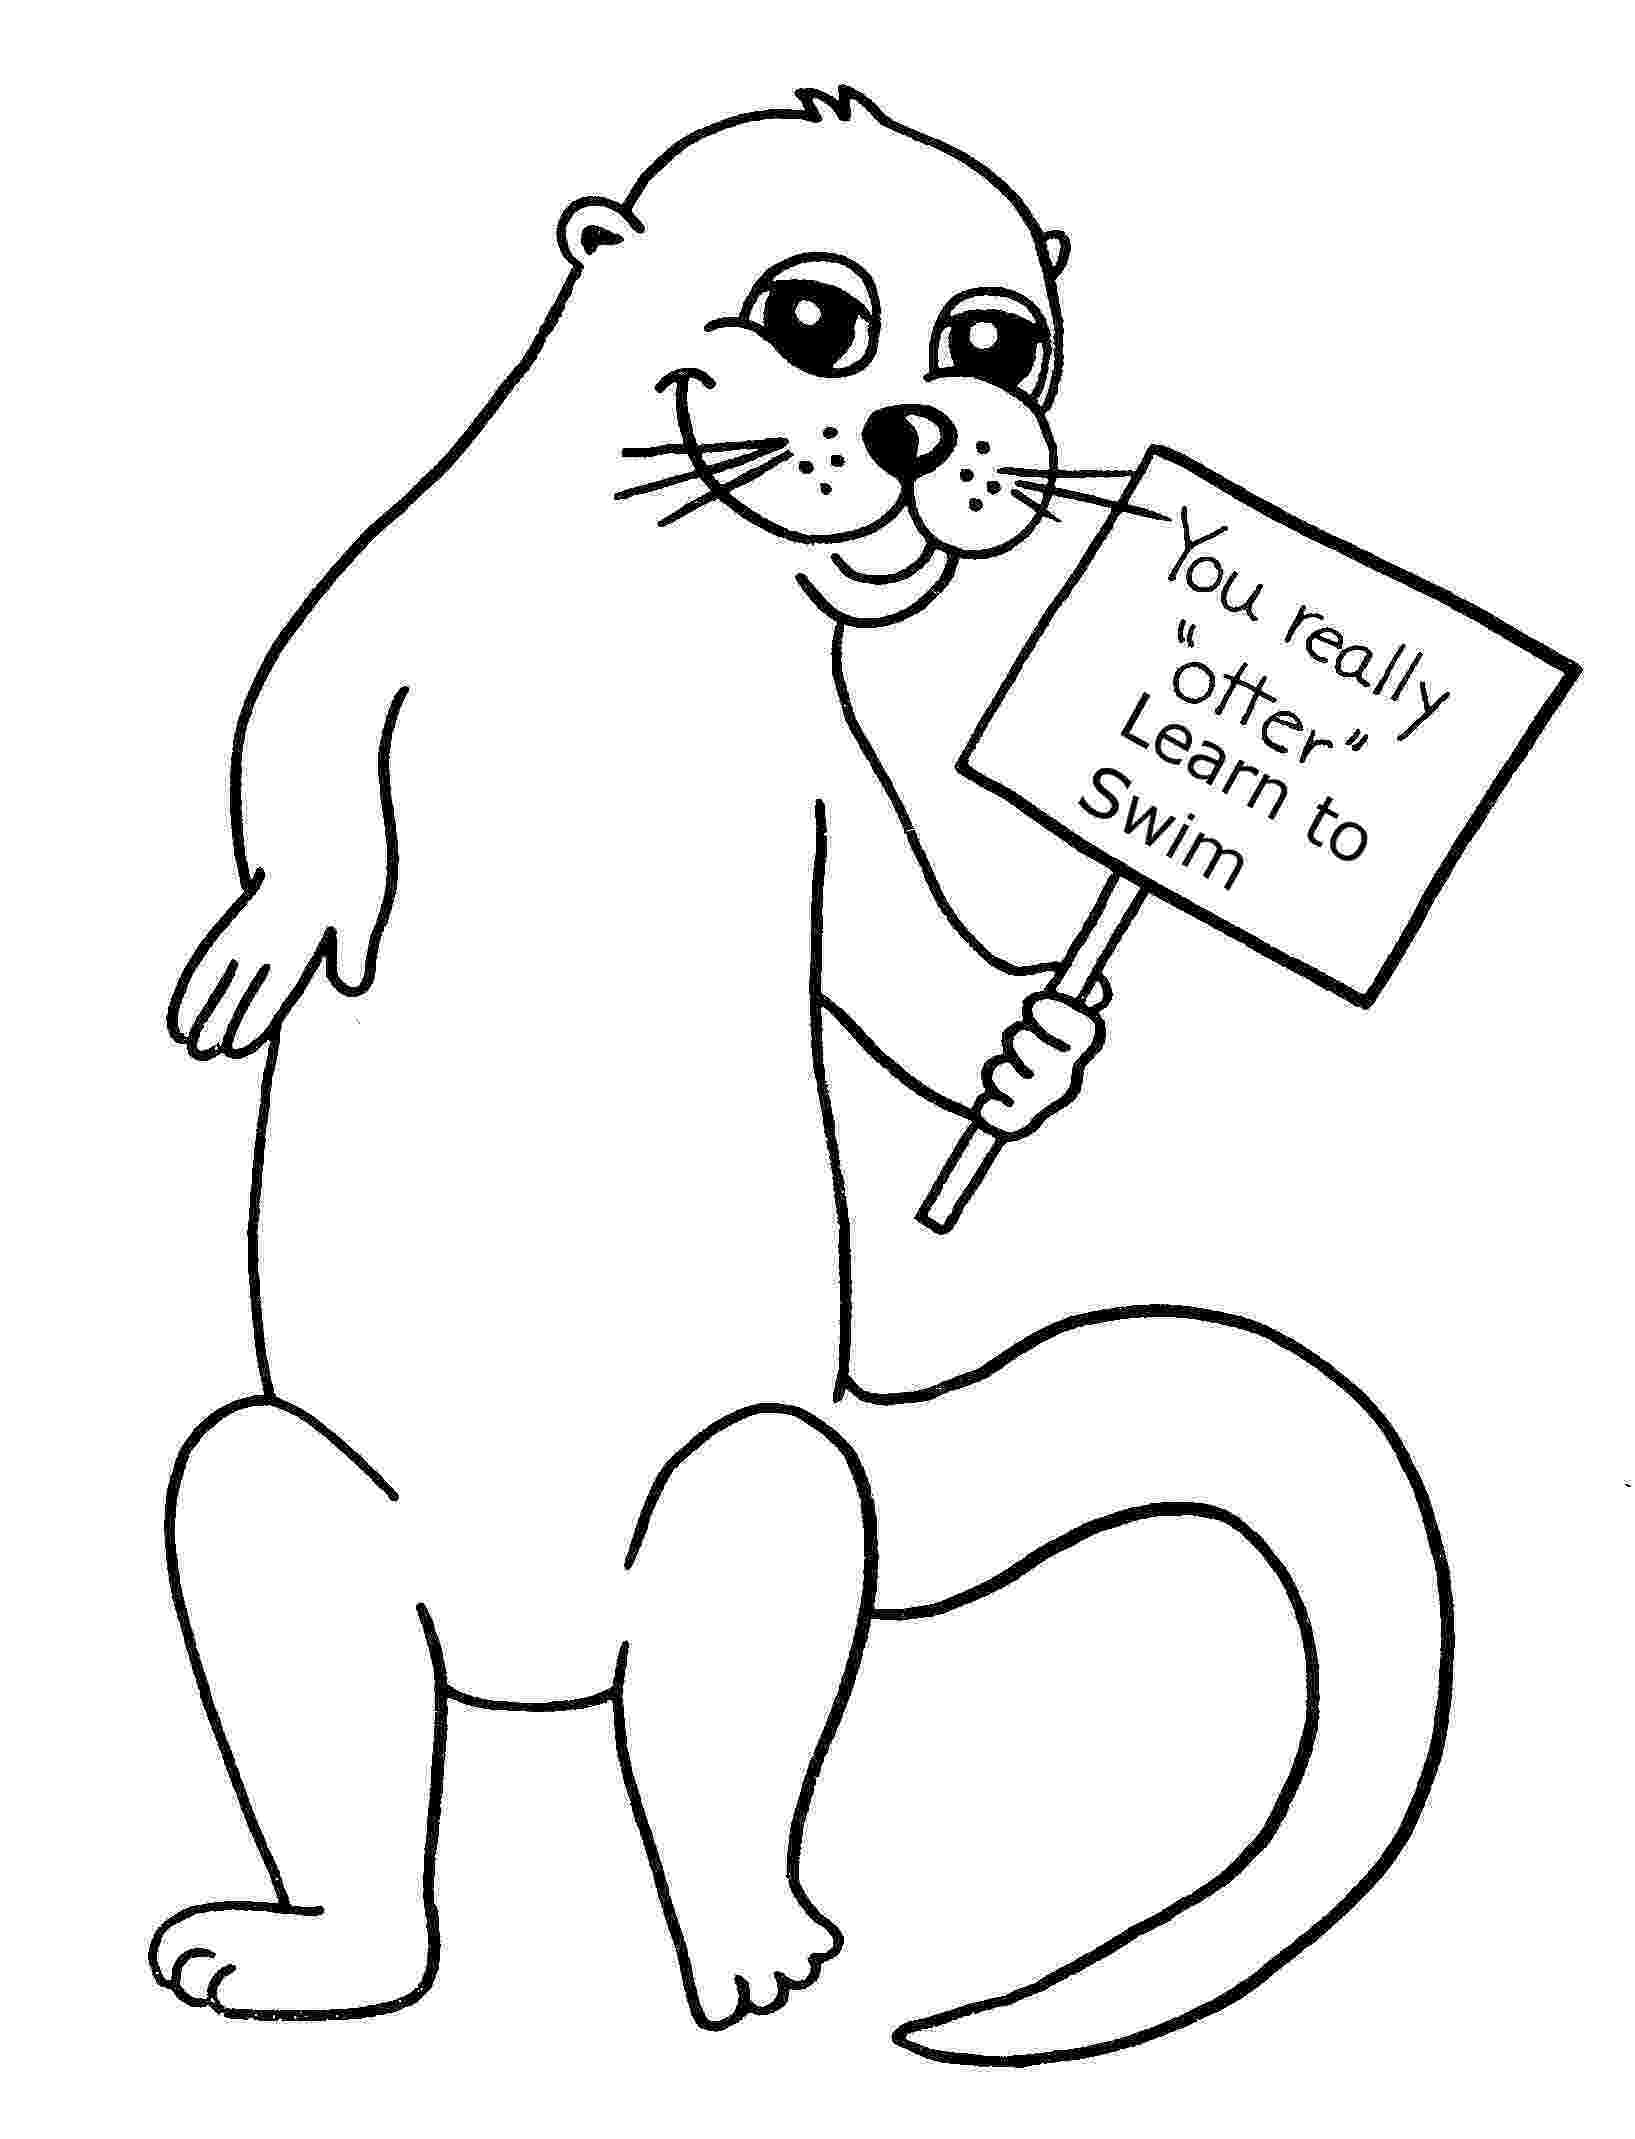 otter coloring pages otter 2 coloring page free printable coloring pages coloring pages otter 